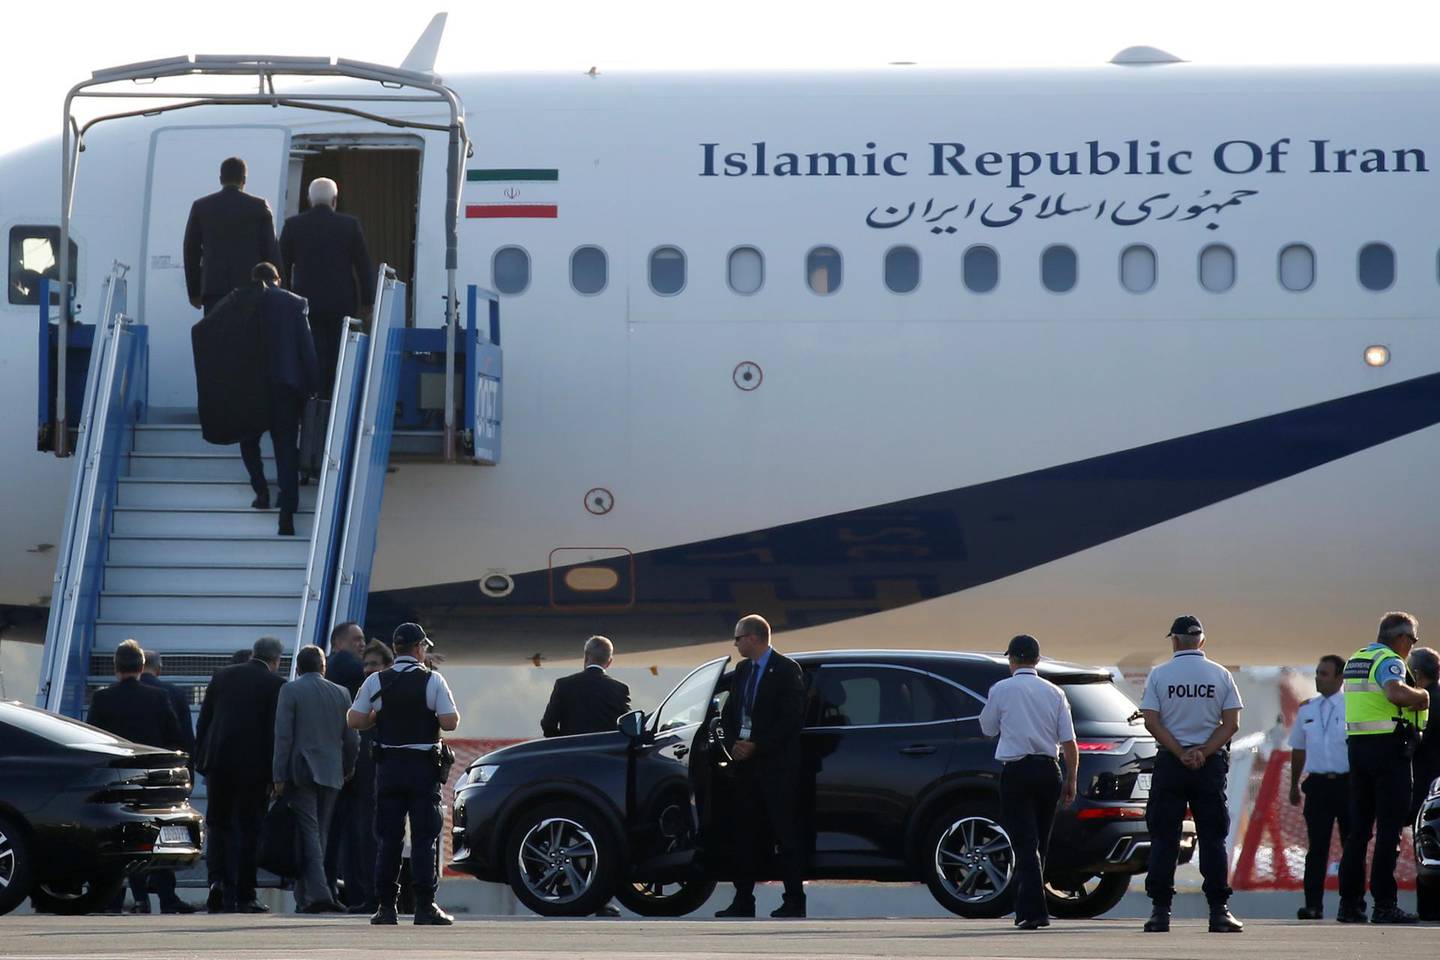 An Iranian government plane is seen on the tarmac at Biarritz airport in Anglet during the G7 summit in Biarritz, France, August 25, 2019. Iran’s foreign minister Mohammad Javad Zarif arrived on Sunday in Biarritz, southwestern France, where leaders of the G7 group of nations are meeting, an Iranian official said.   REUTERS/Regis Duvignau